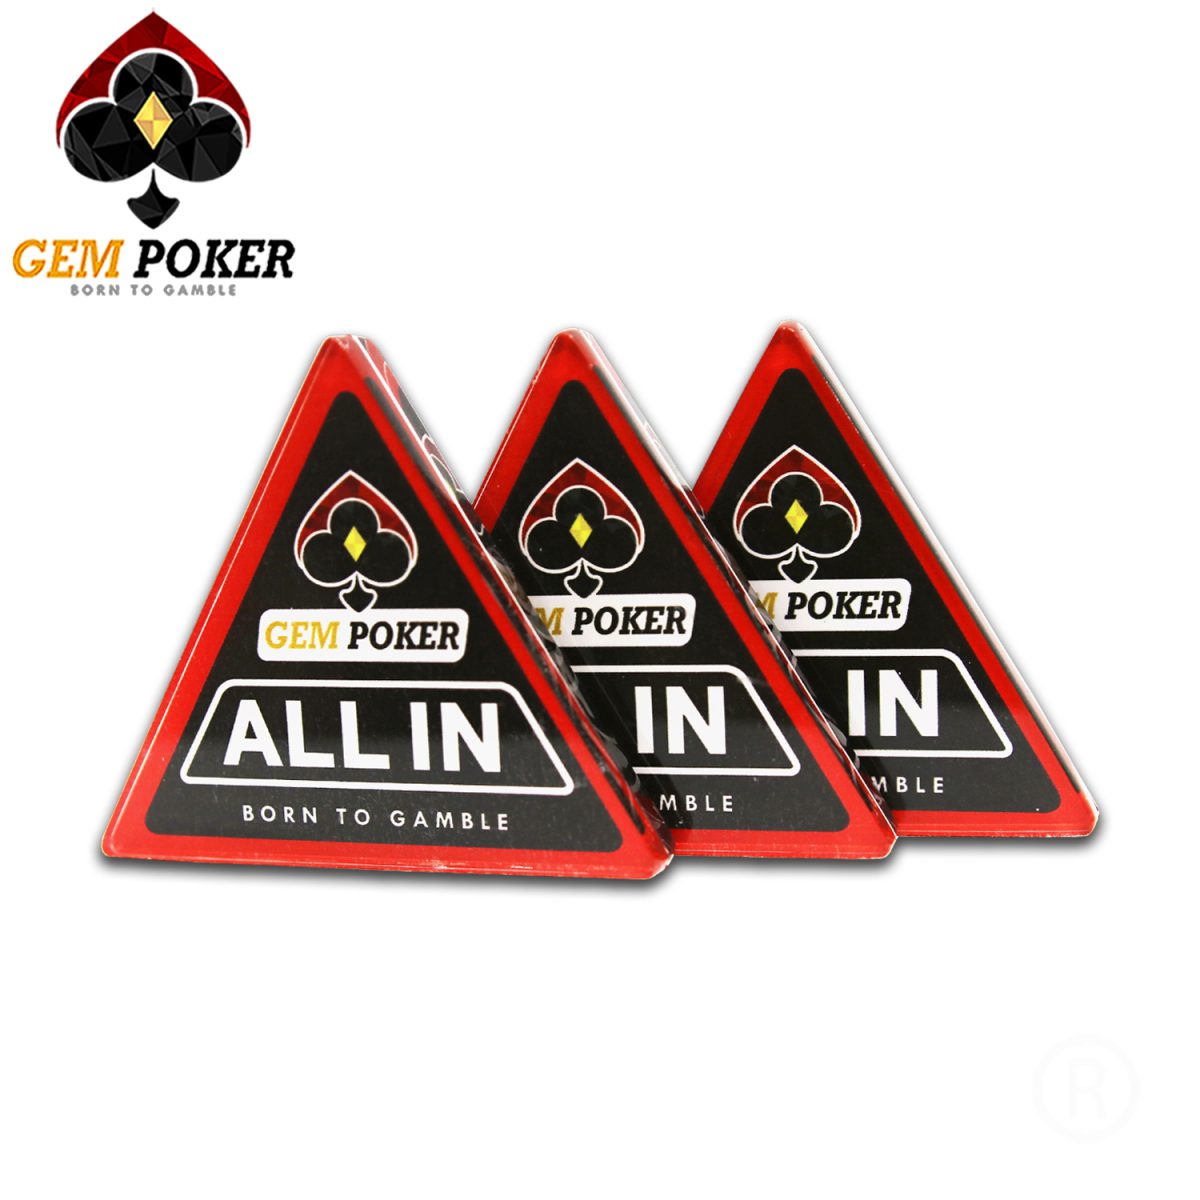 NÚT ALL-IN GEMPOKER 100% ACRYLIC